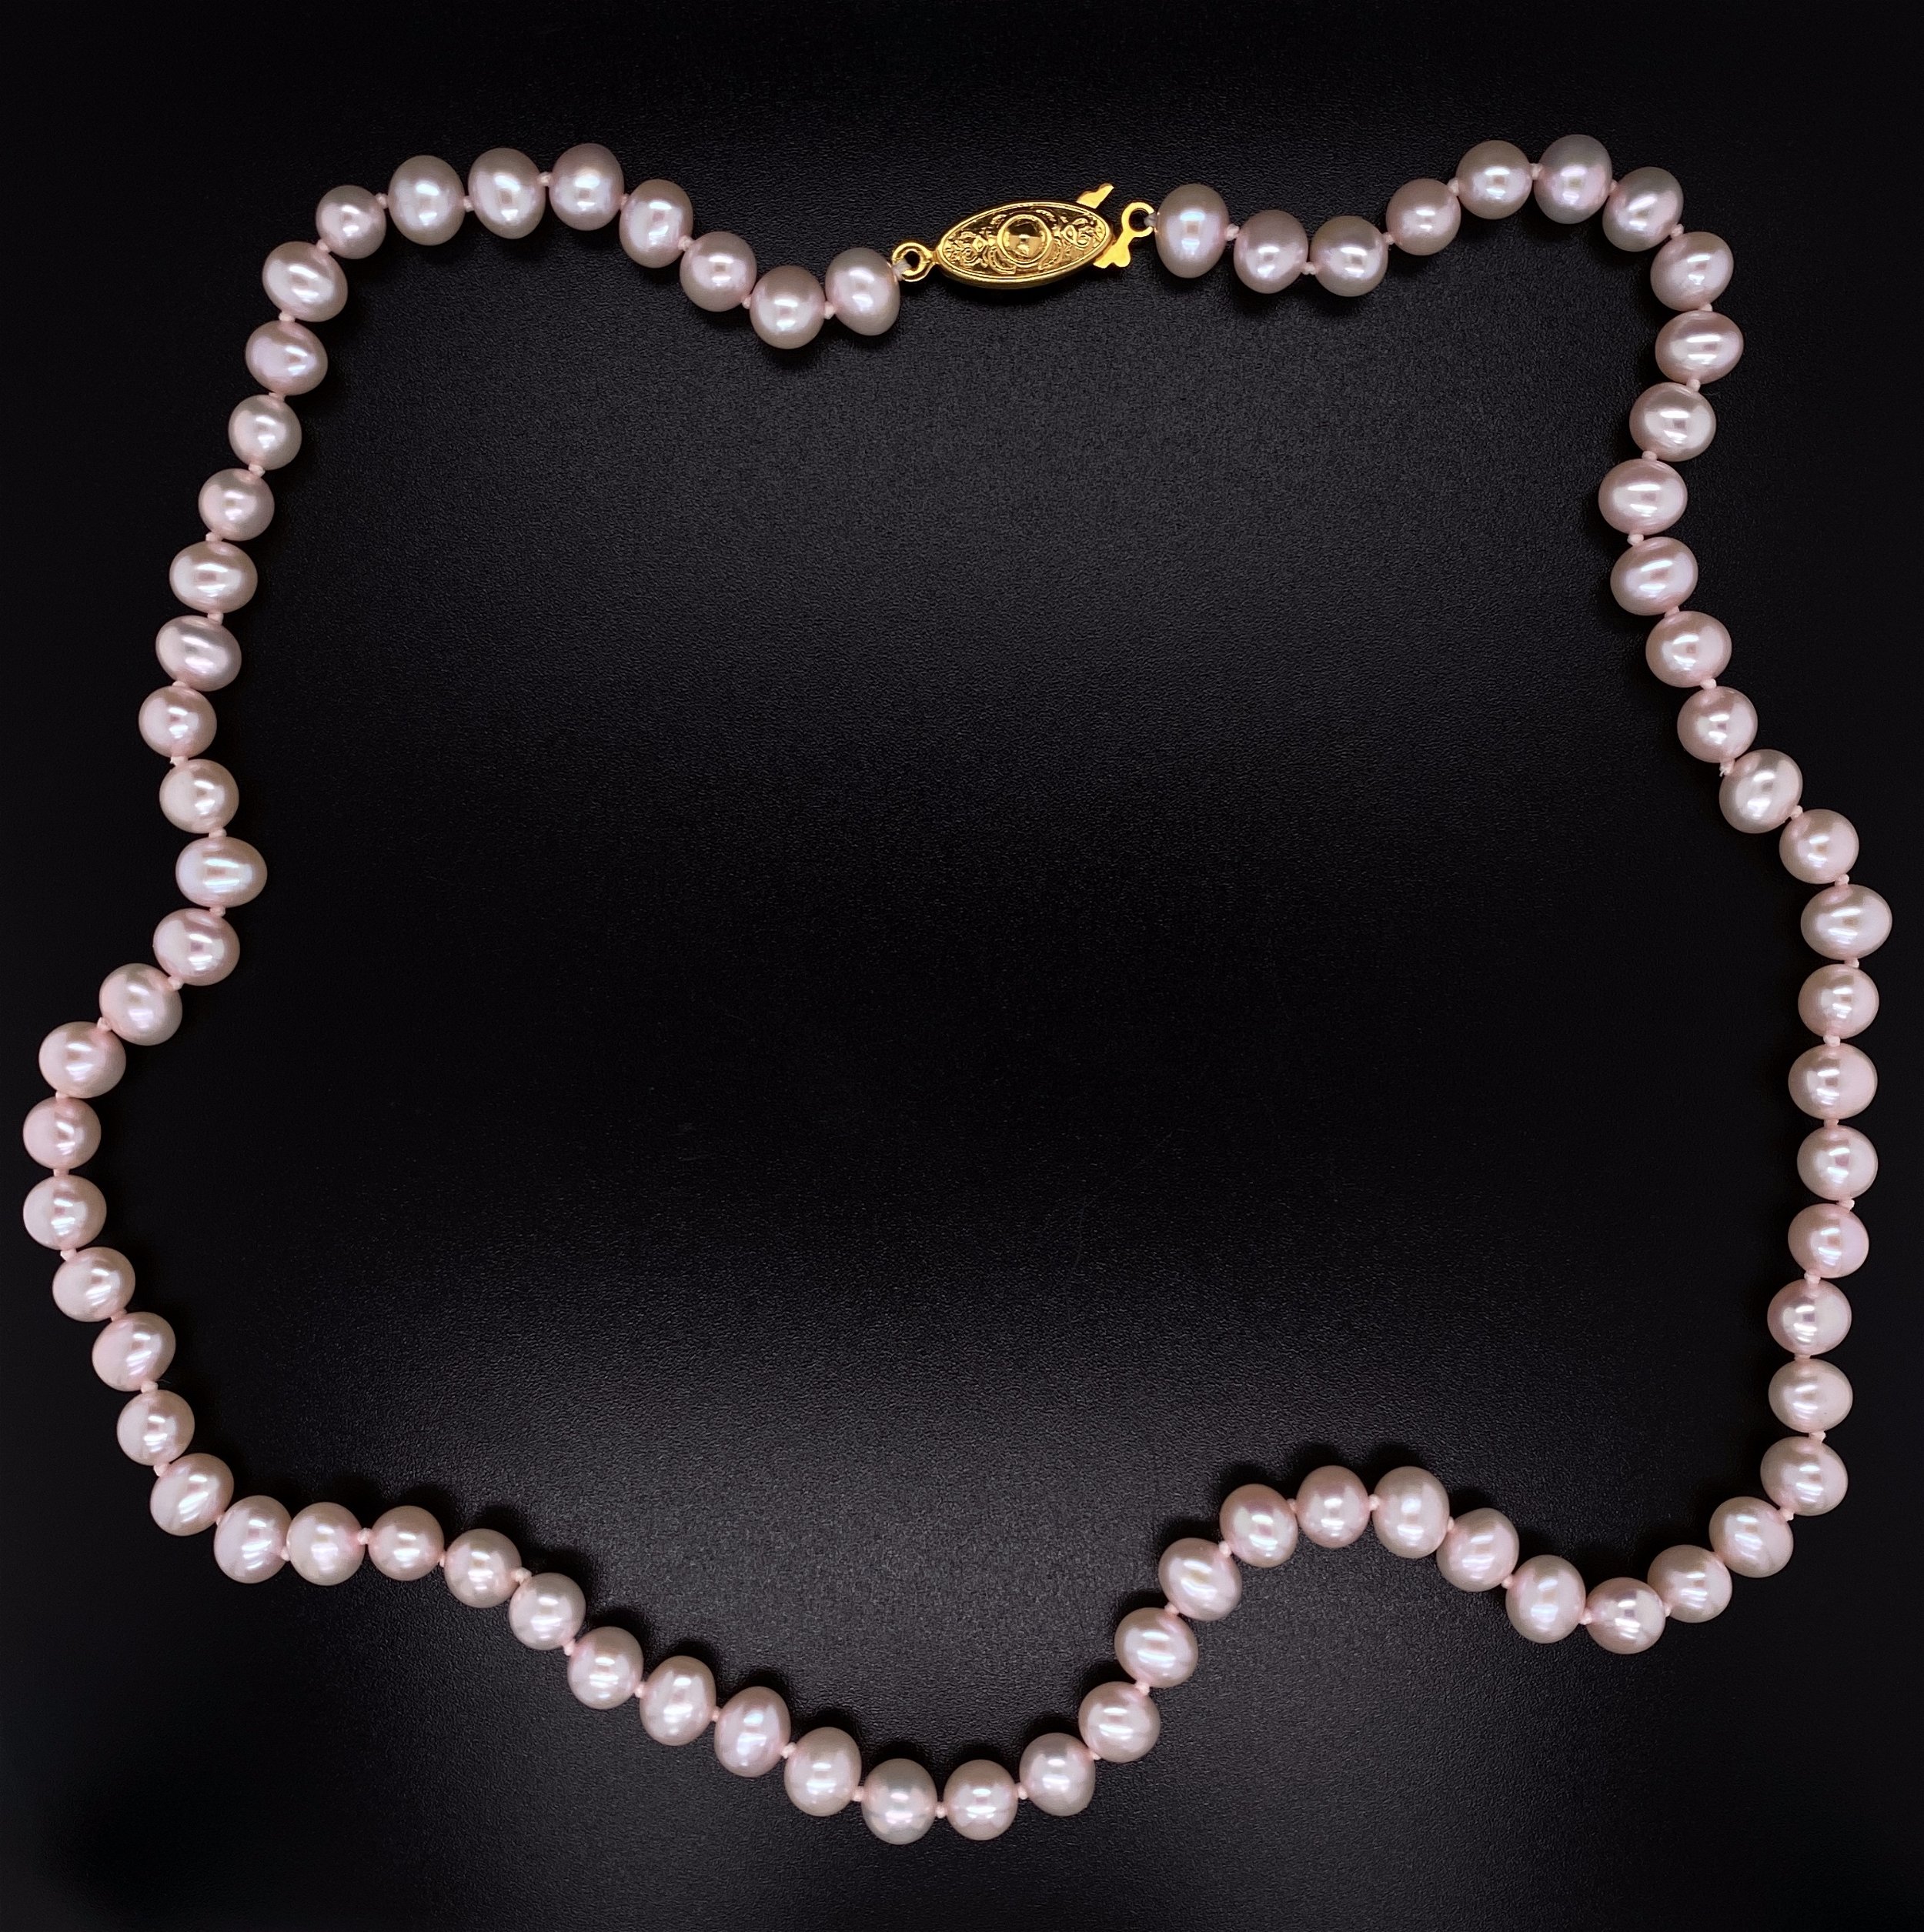 6mm Freshwater Pearl Necklace GF YG Clasp 20.7g, 18"